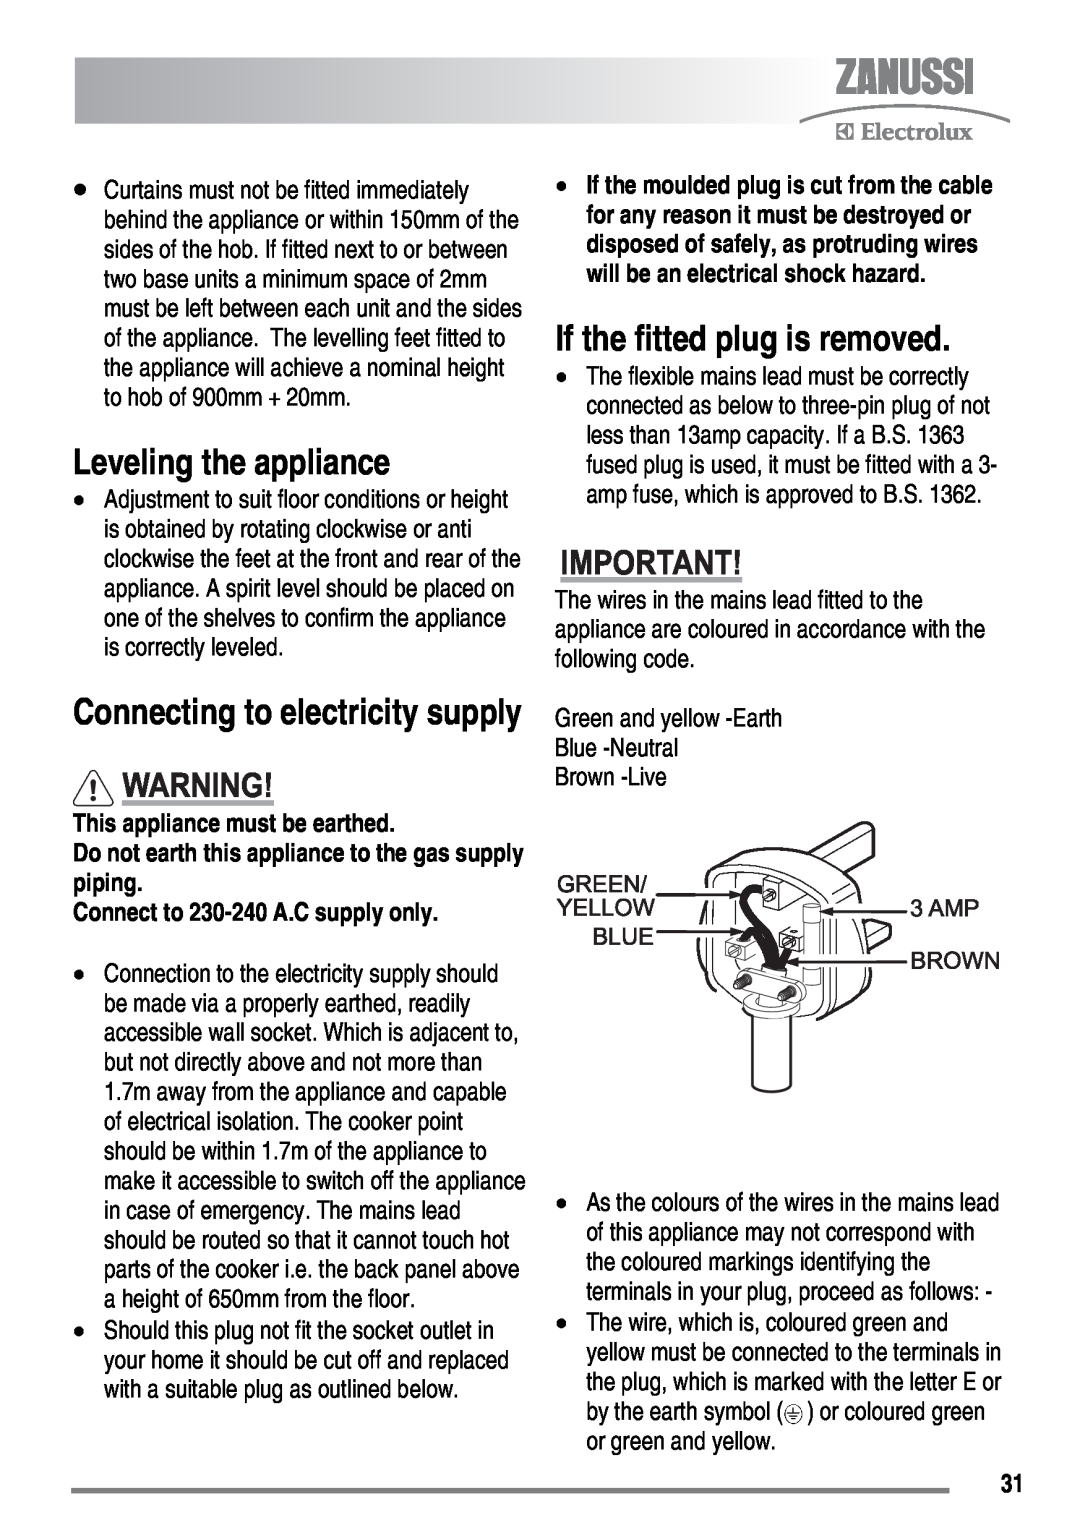 Zanussi ZKG6010 user manual Leveling the appliance, If the fitted plug is removed, Connecting to electricity supply 